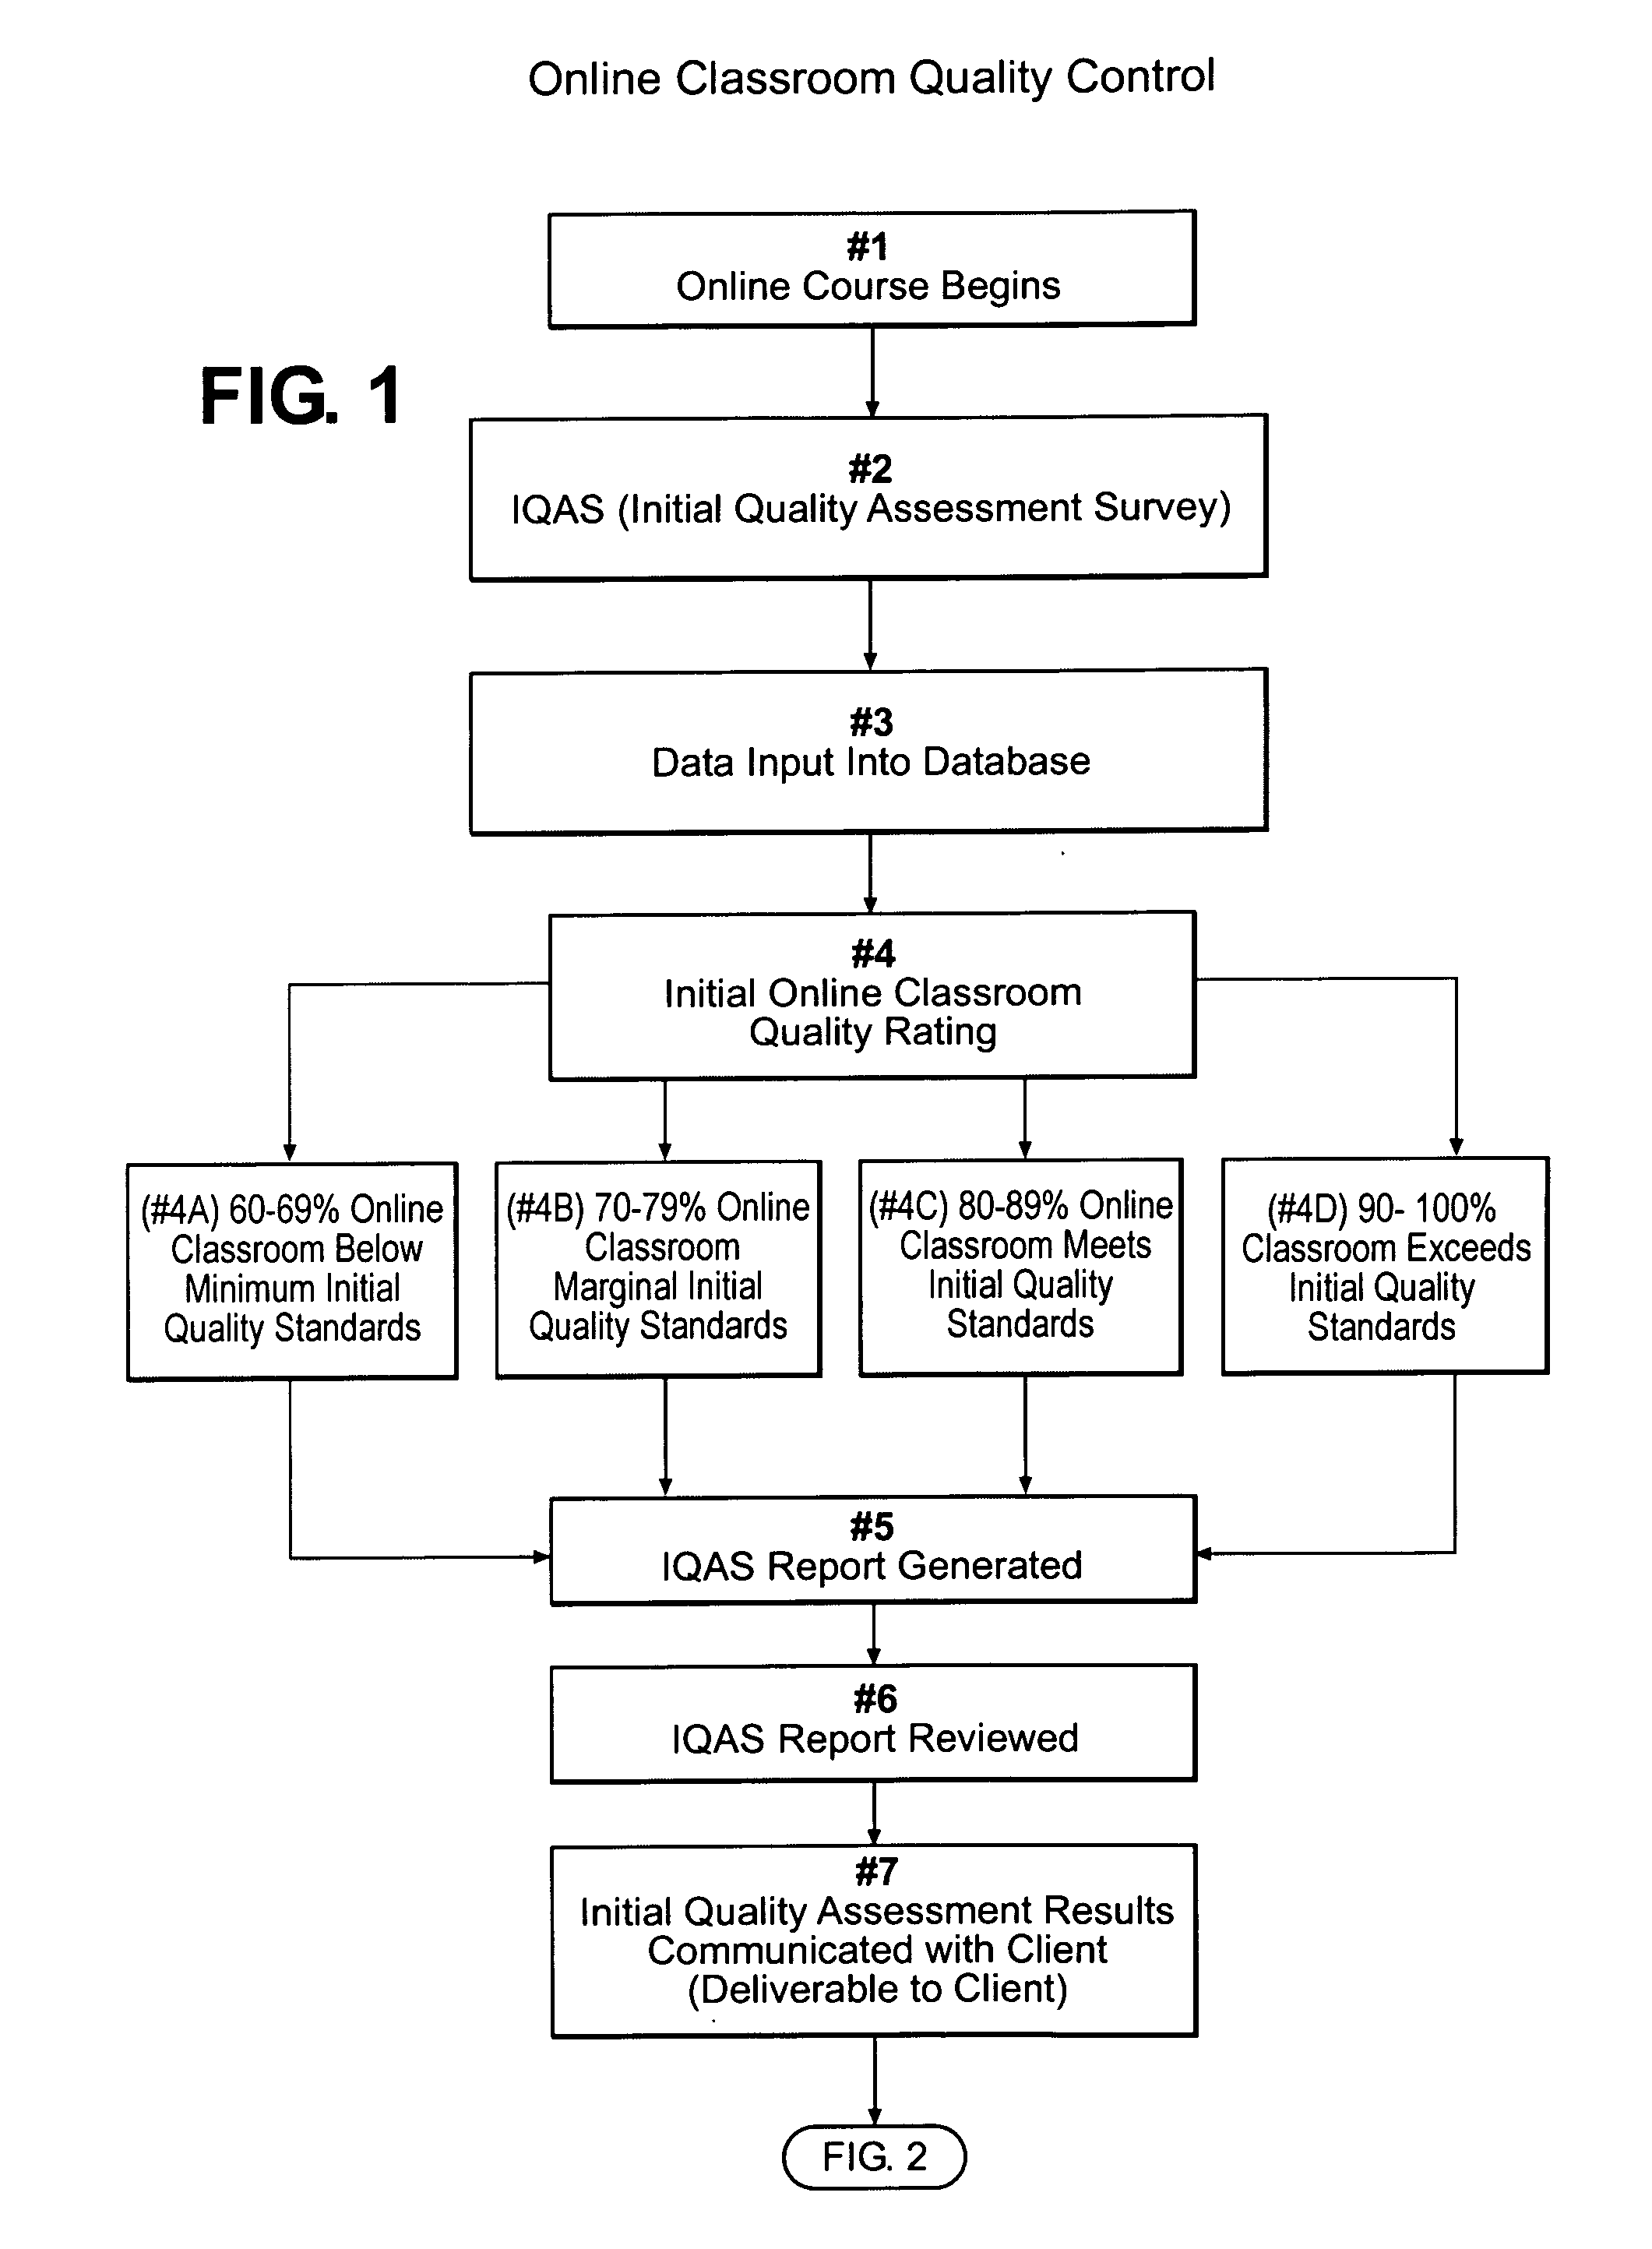 Online classroom quality control system and method